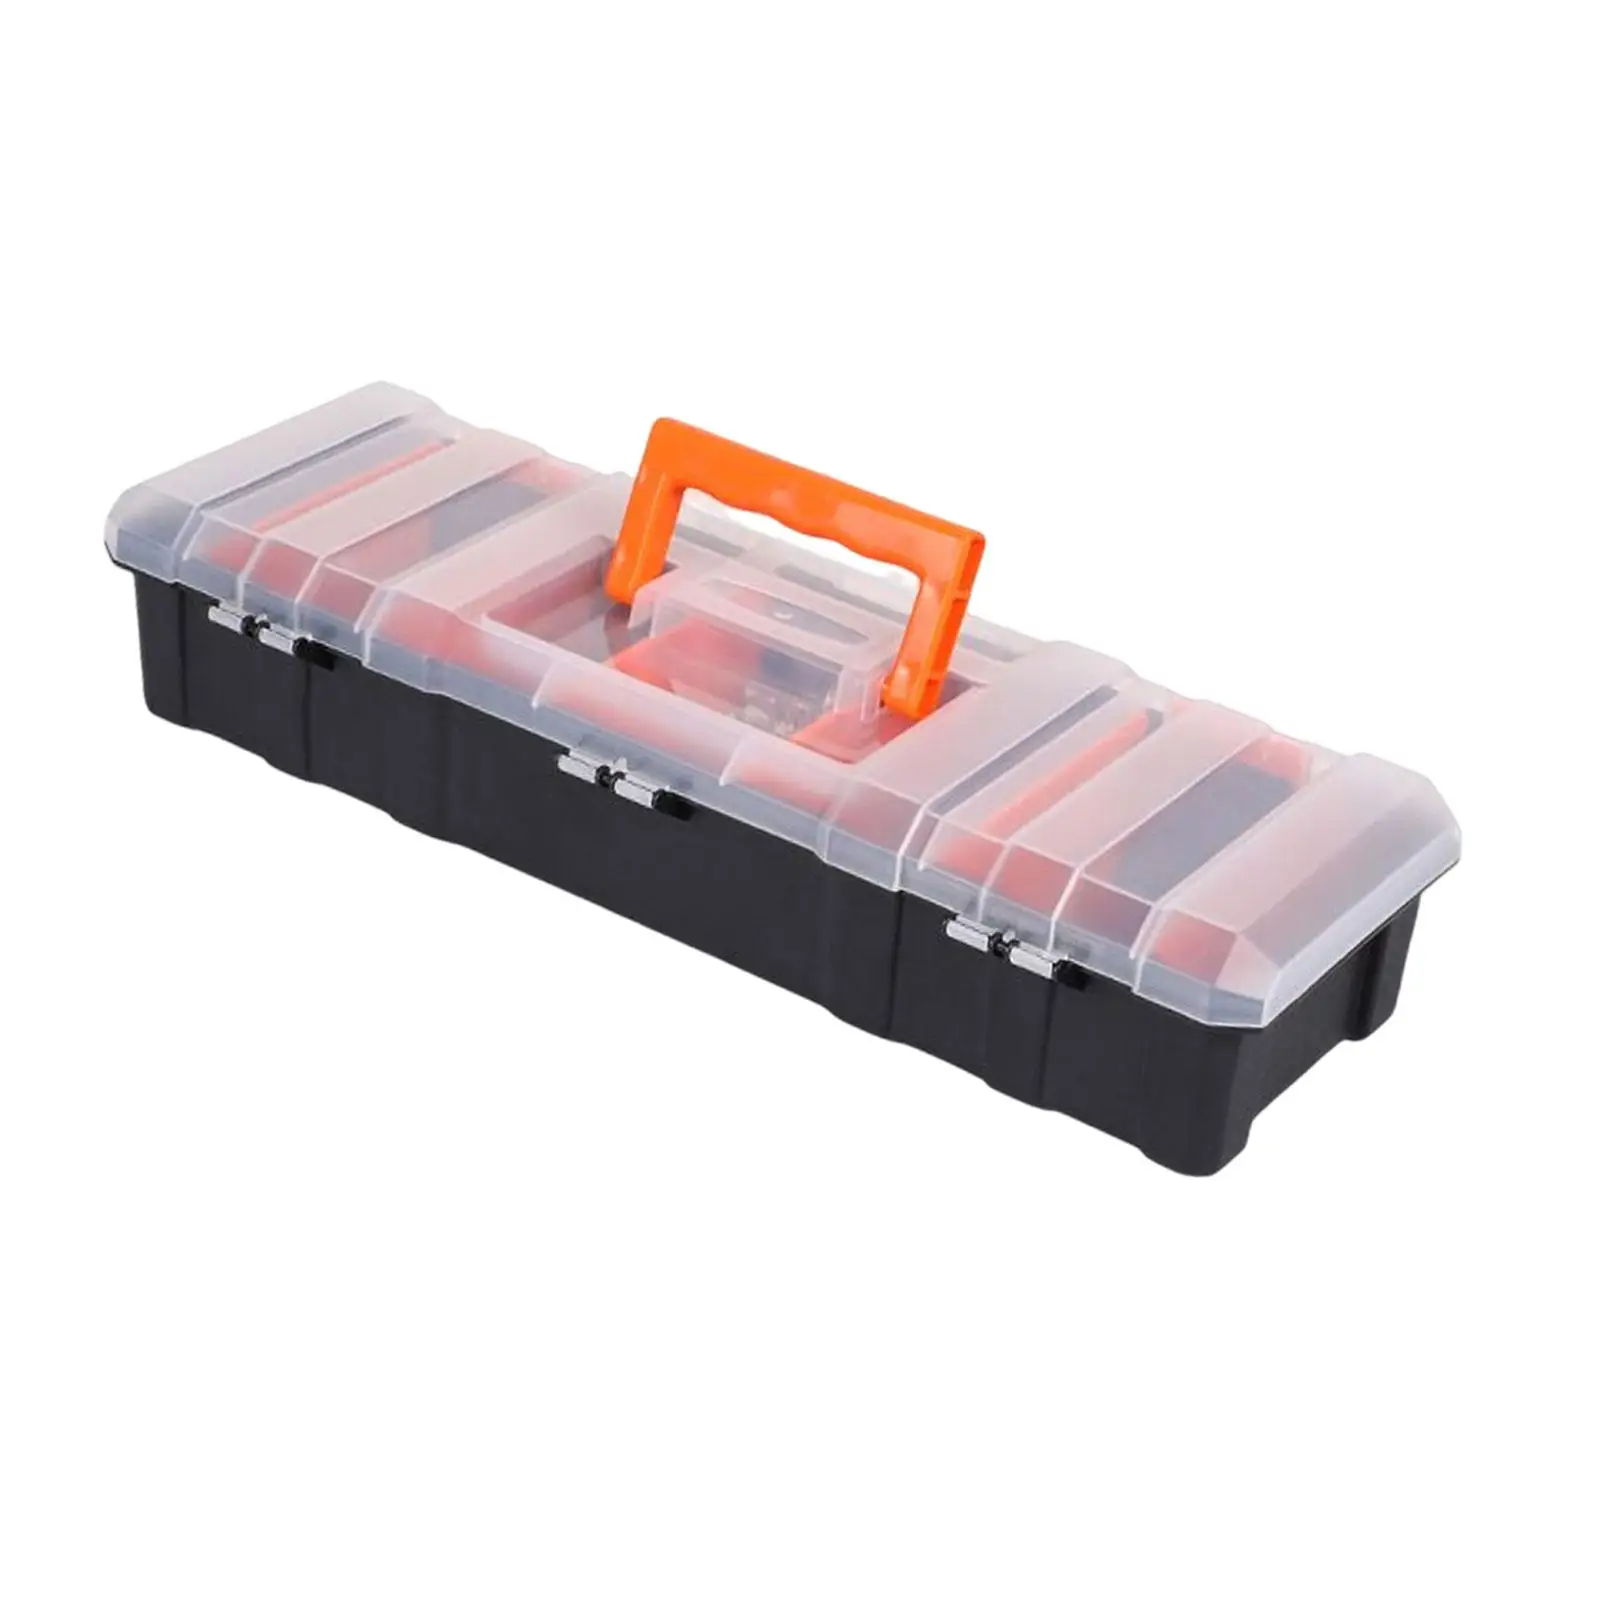 Multifunction Organizer Tool Box Protective Toolbox Protection Impact Resistant Portable Storage Case for Outdoor Accessories